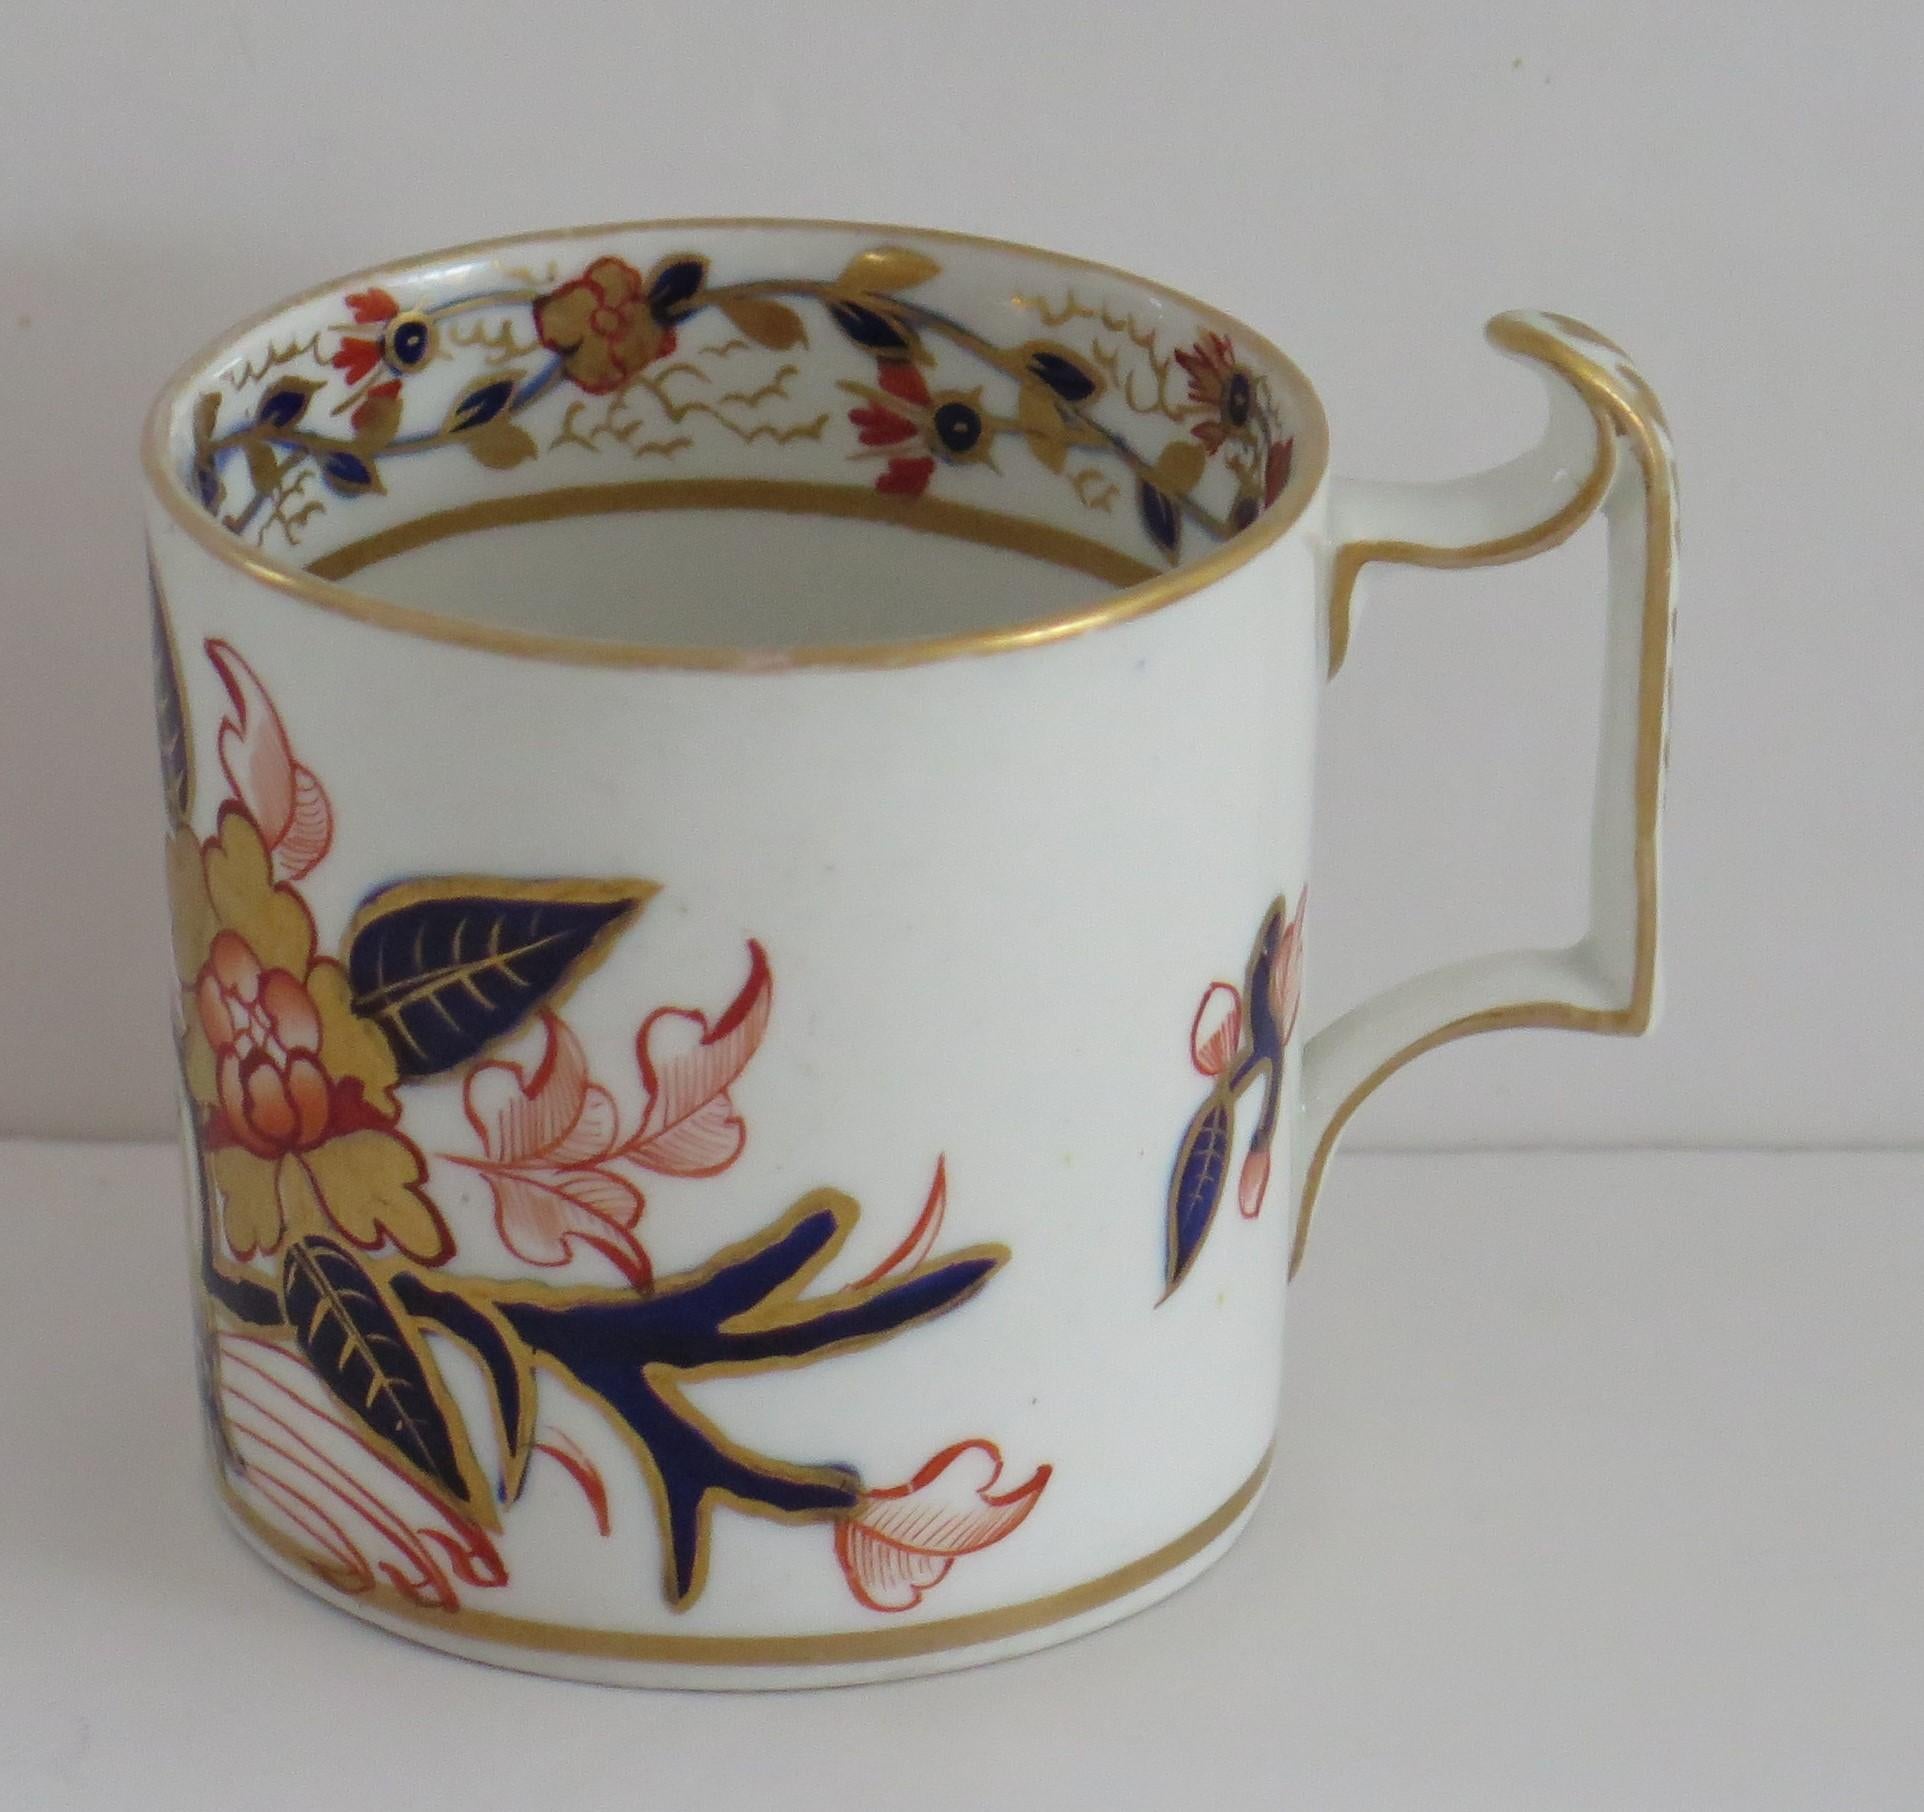 British Georgian Derby Porcelain Coffee Can Hand Painted in Old Japan Ptn, circa 1810